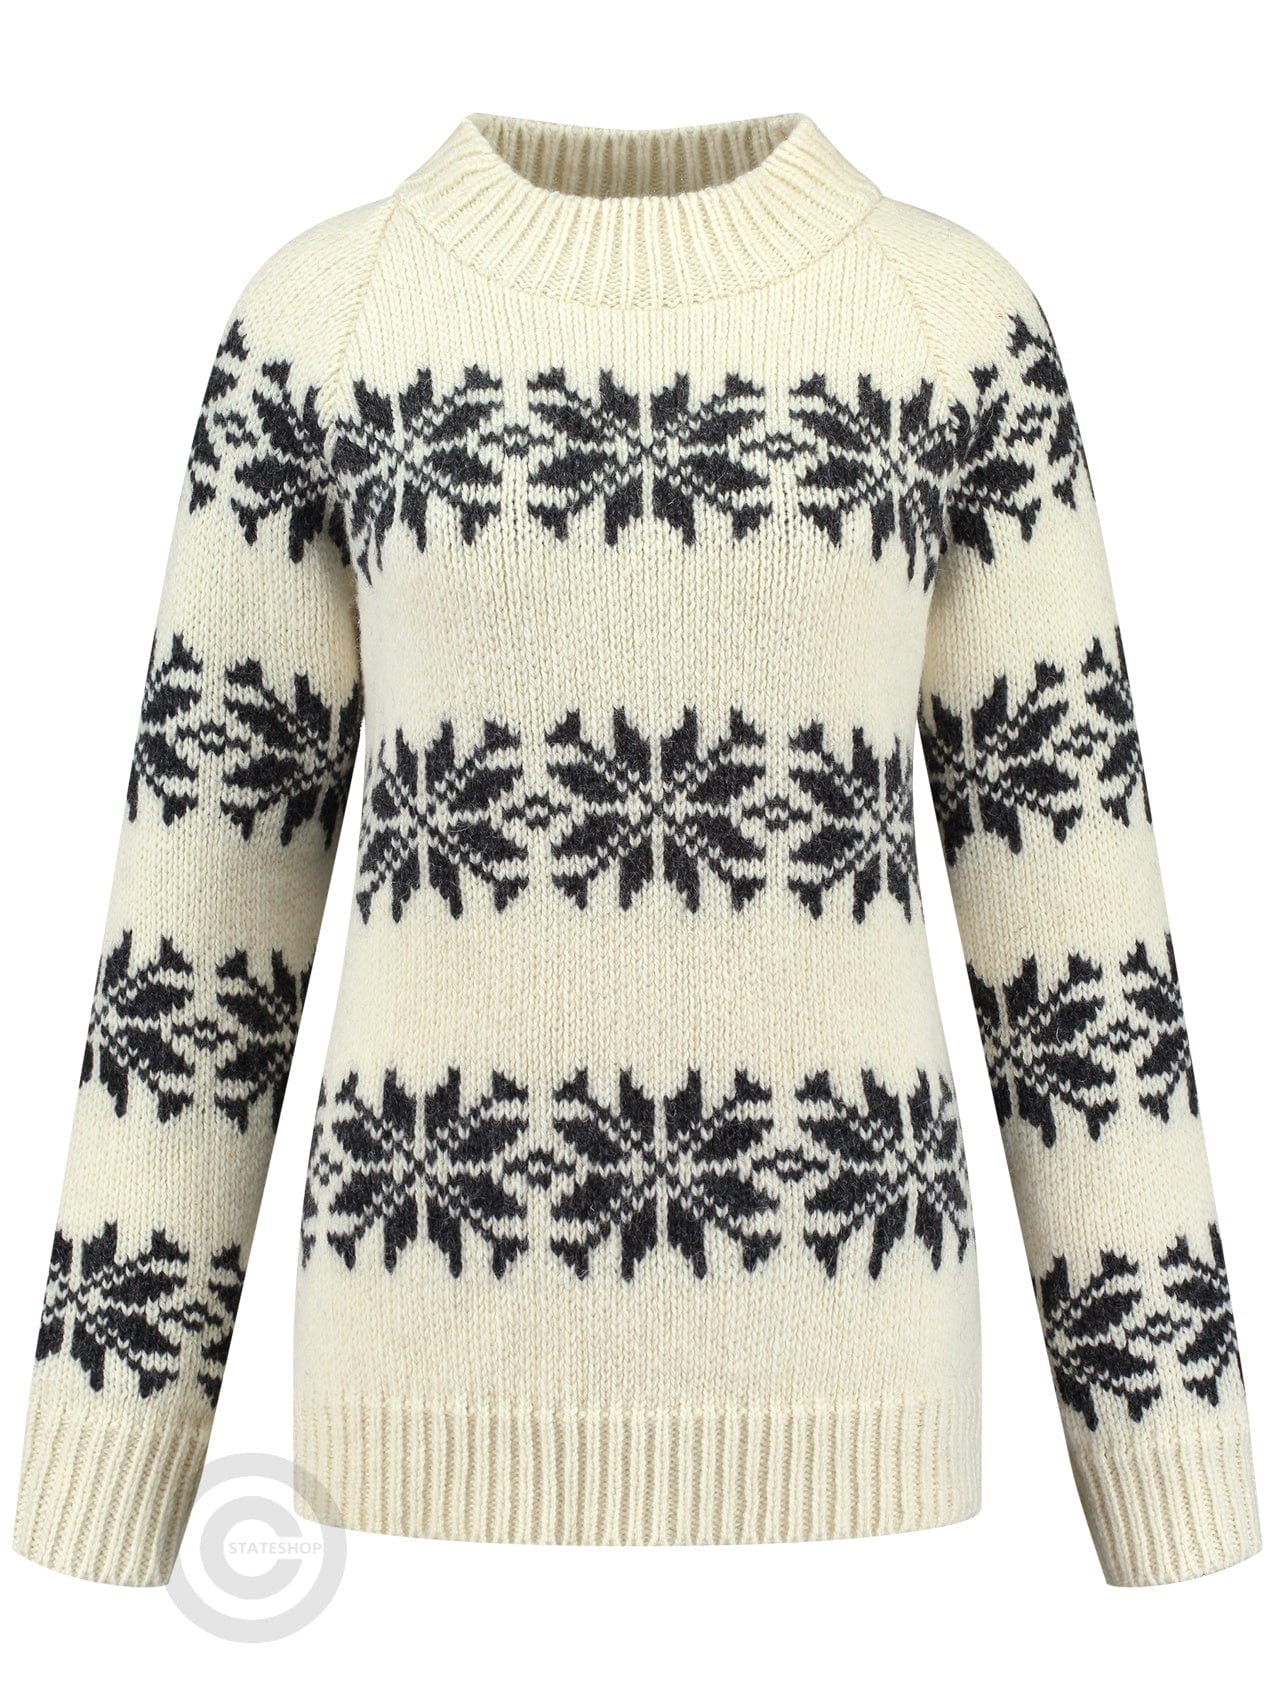 Norfinde Icelandic jumper fitted with turtleneck of 100% pure wool